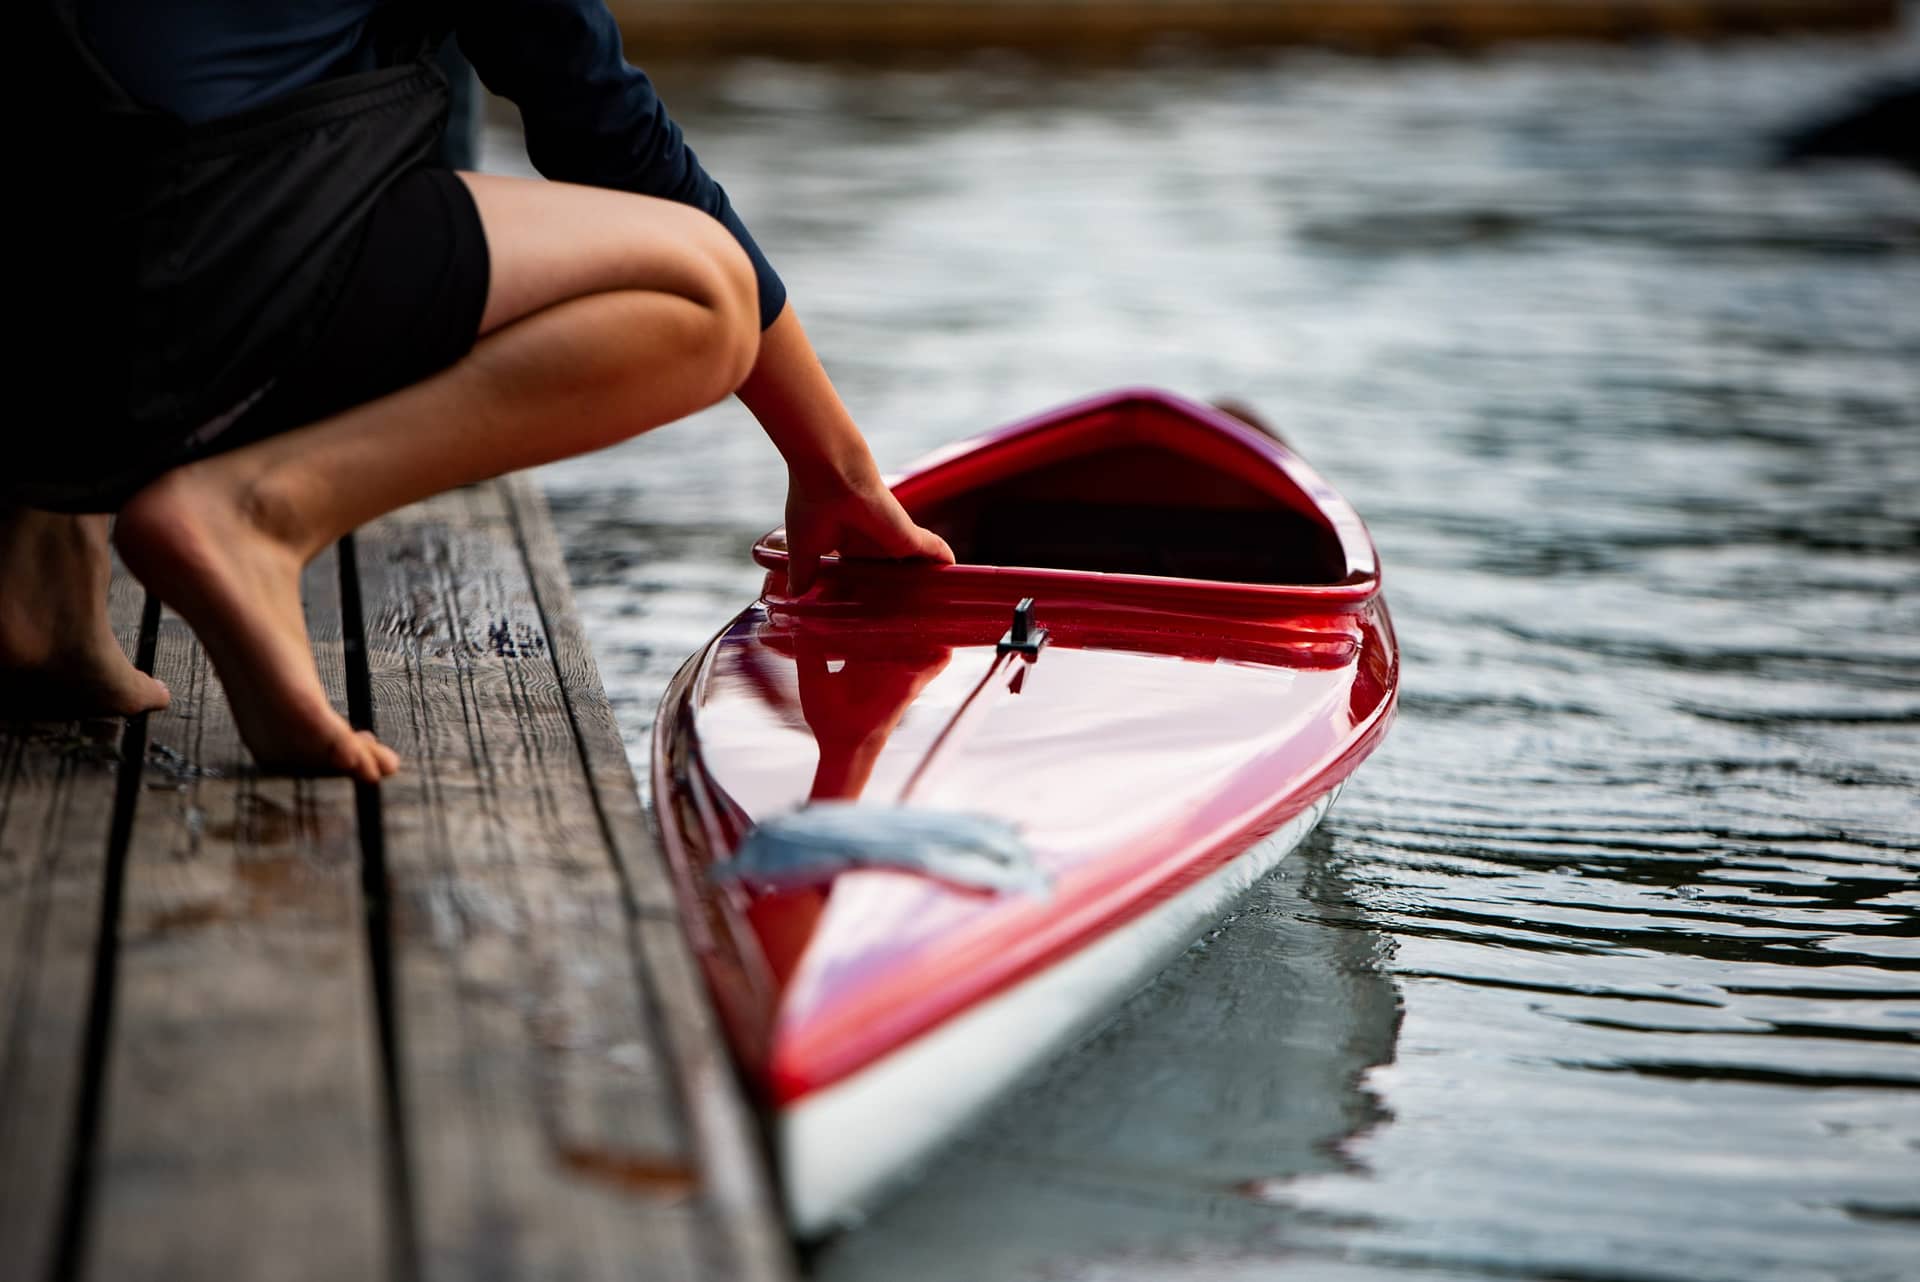 Athlete,,Canoeist,,Holding,A,Sports,Canoe,In,His,Hands,At